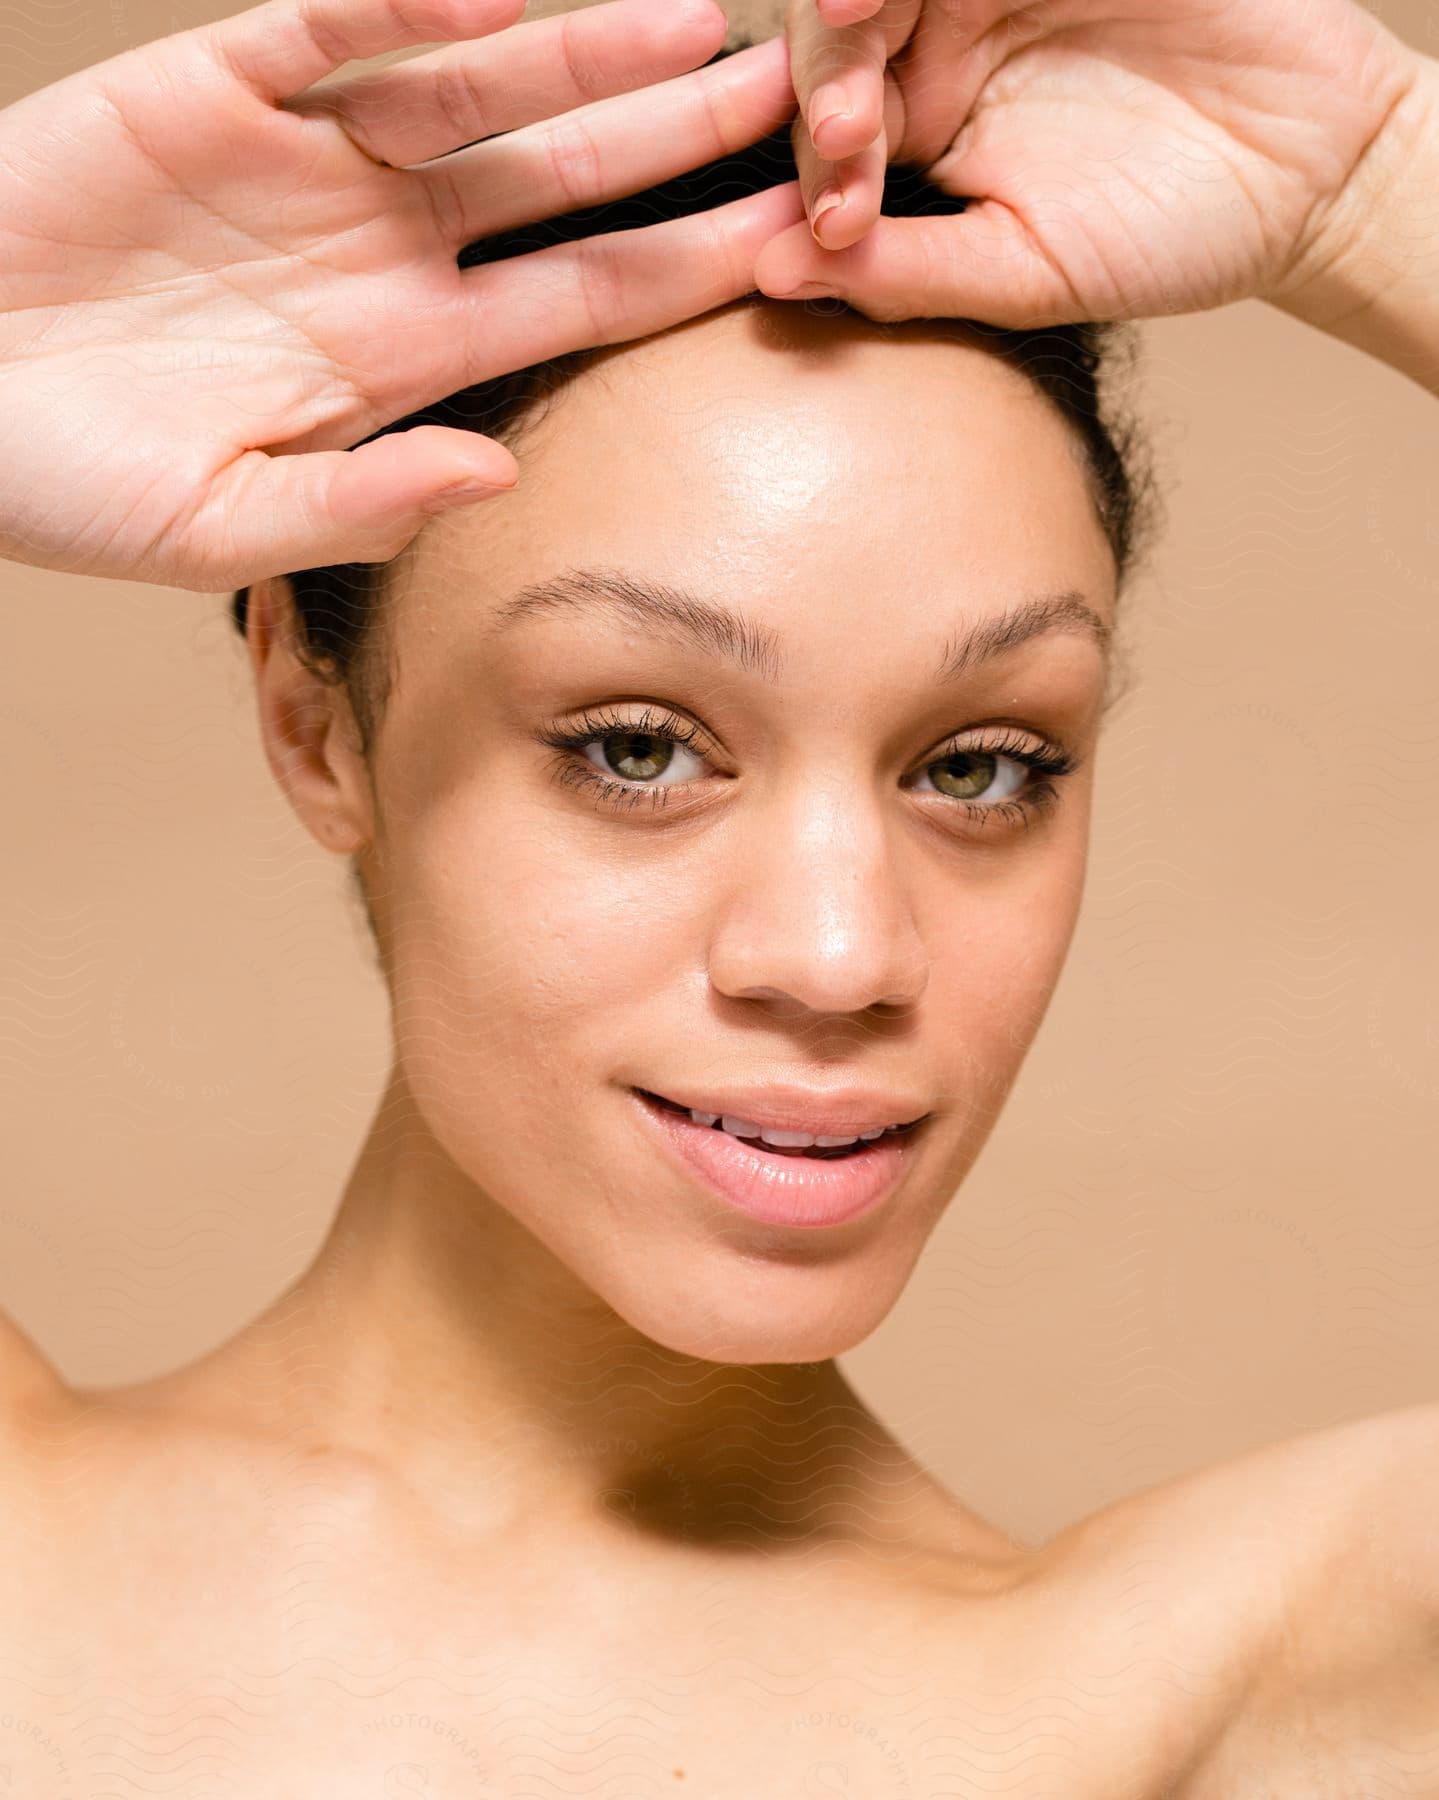 A portrait of a woman modeling some skin care products.